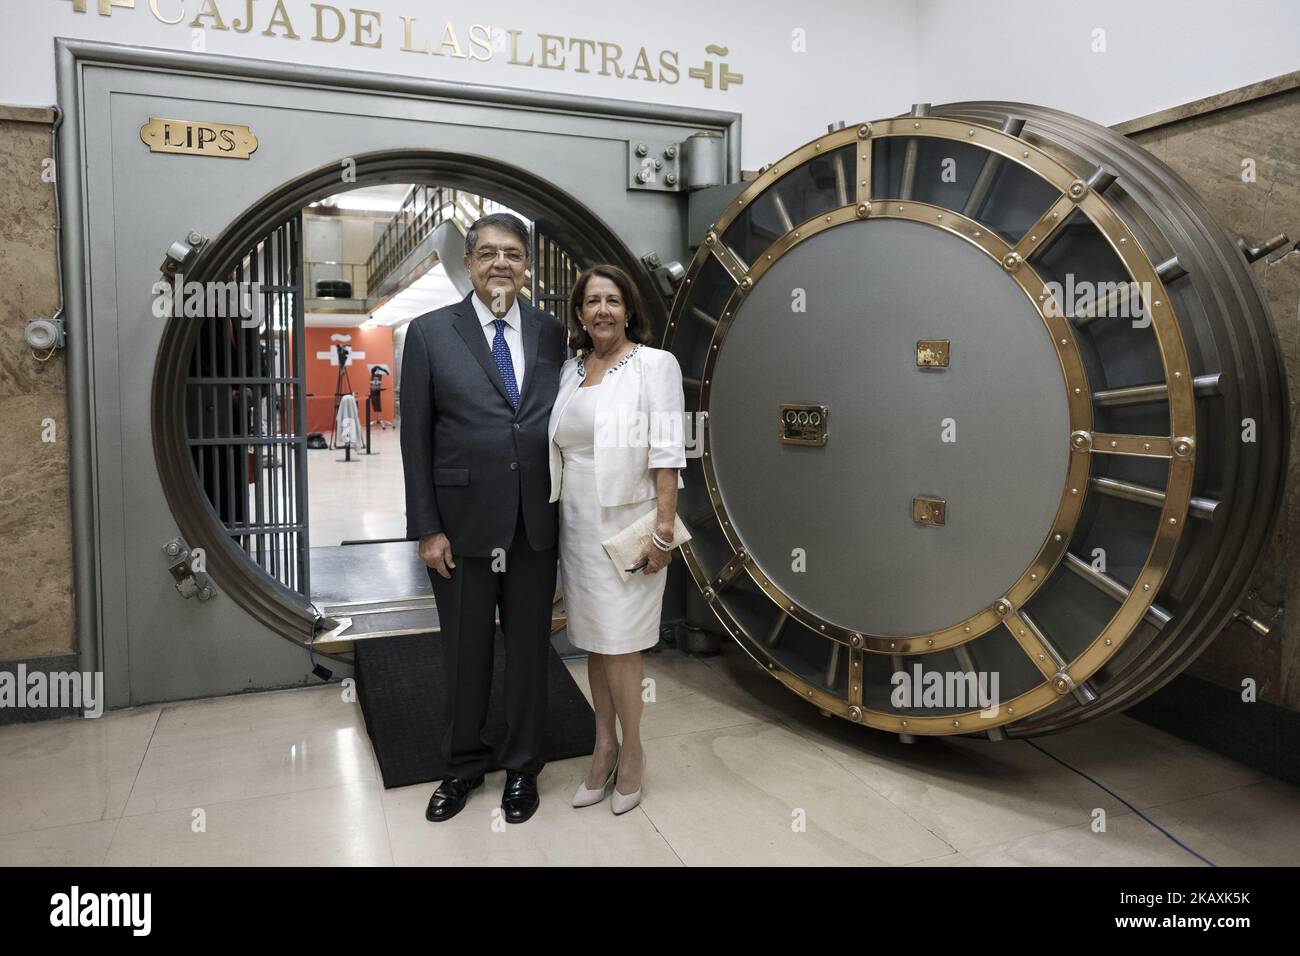 Nicaraguan writer Sergio Ramirez and Gertrudis Guerrero during a ceremony where Ramirez has granted his legacy in the 'Letters' Box' ('Caja de las Letras') at the Cervantes Institute in Madrid, Spain on April 20, 2018. Ramirez will receive the 2017 Cervantes Prize, the highest literary honor of the Spanish-speaking world, in a ceremony that will take place at the assembly hall of the University of Alcala de Henaresthe on April 23. (Photo by Oscar Gonzalez/NurPhoto) Stock Photo